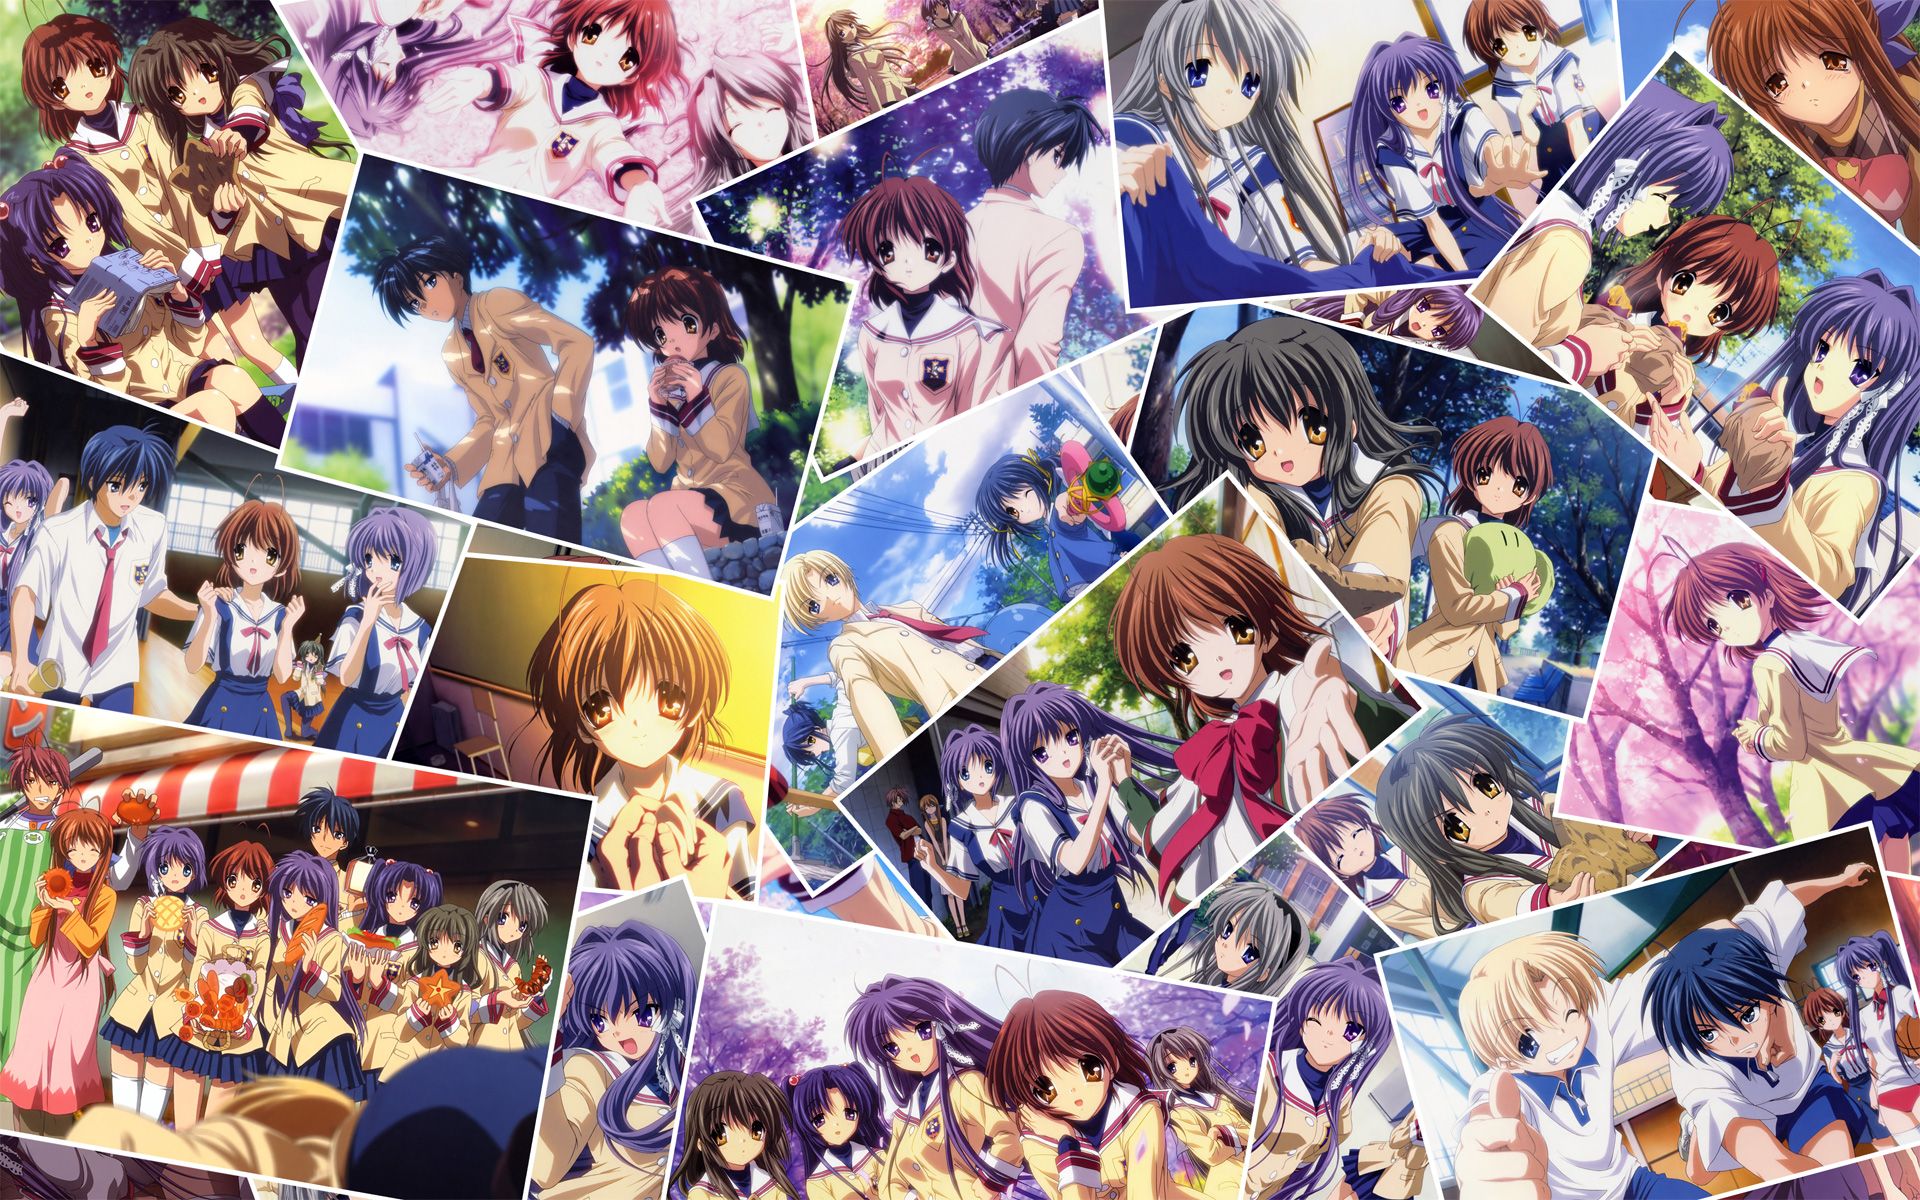 Clannad characters gather in a charming desktop wallpaper.